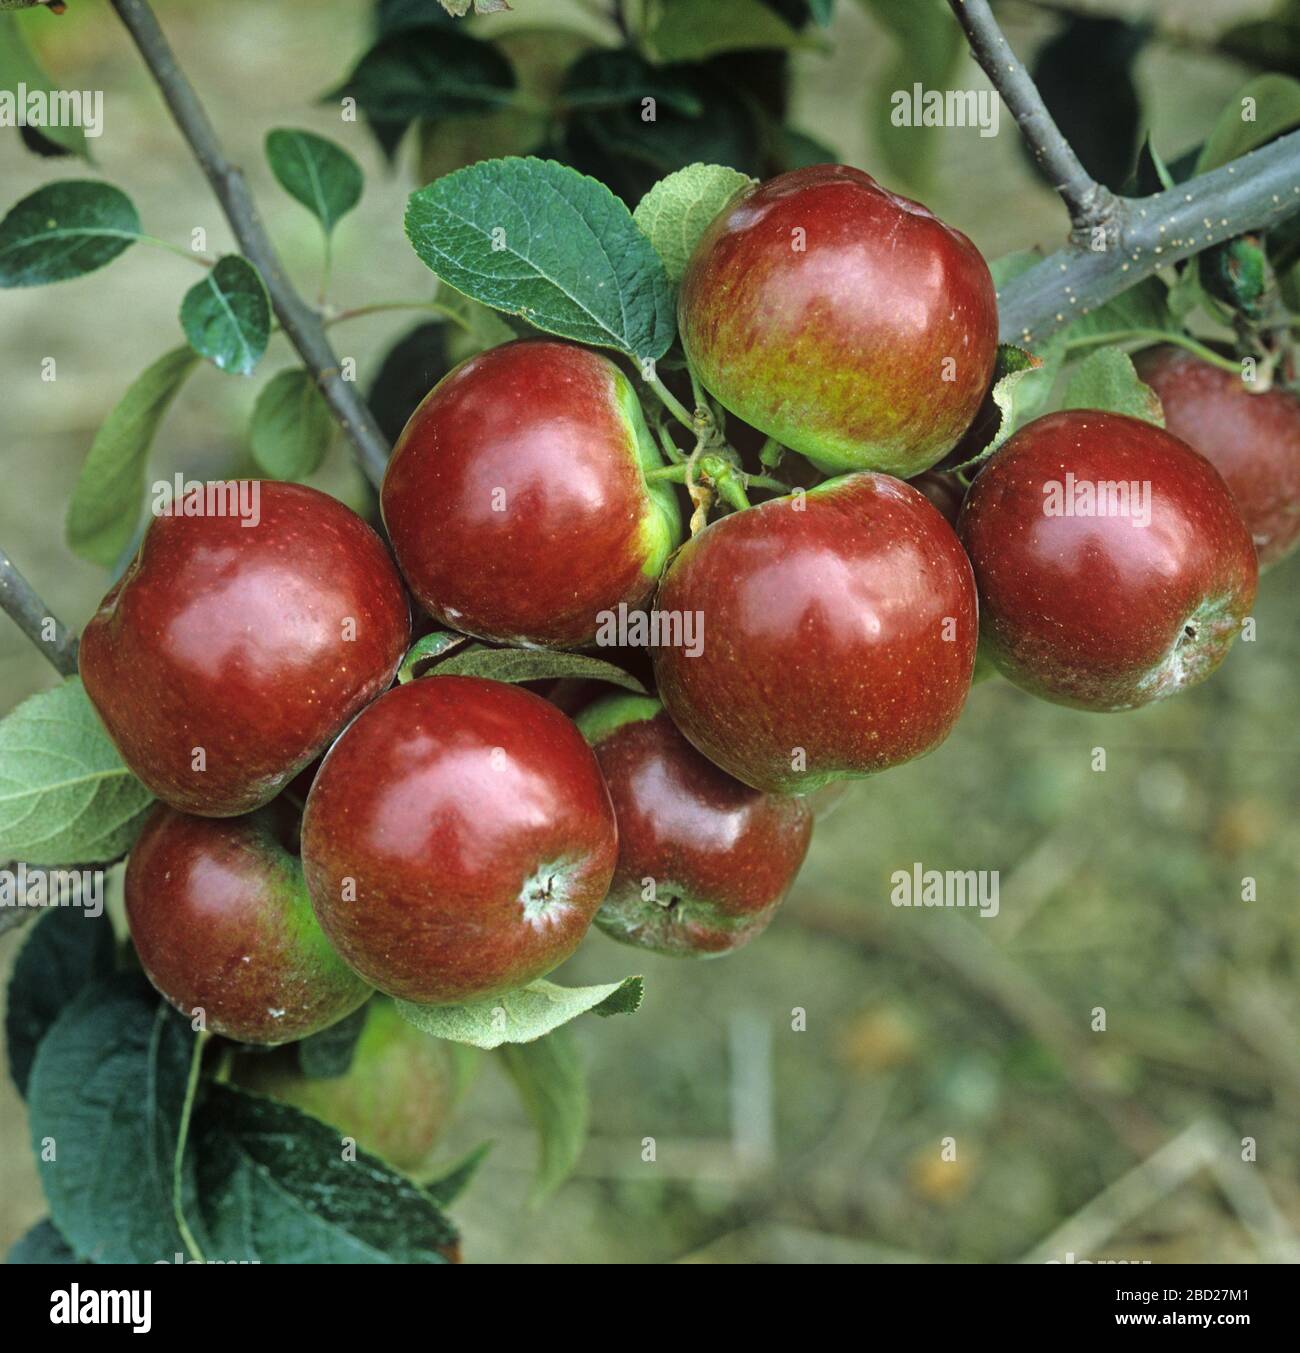 Ripe dark red shiny maqture Spartan apples on the tree in a commercial orchard, Oxfordshire, Septmember Stock Photo